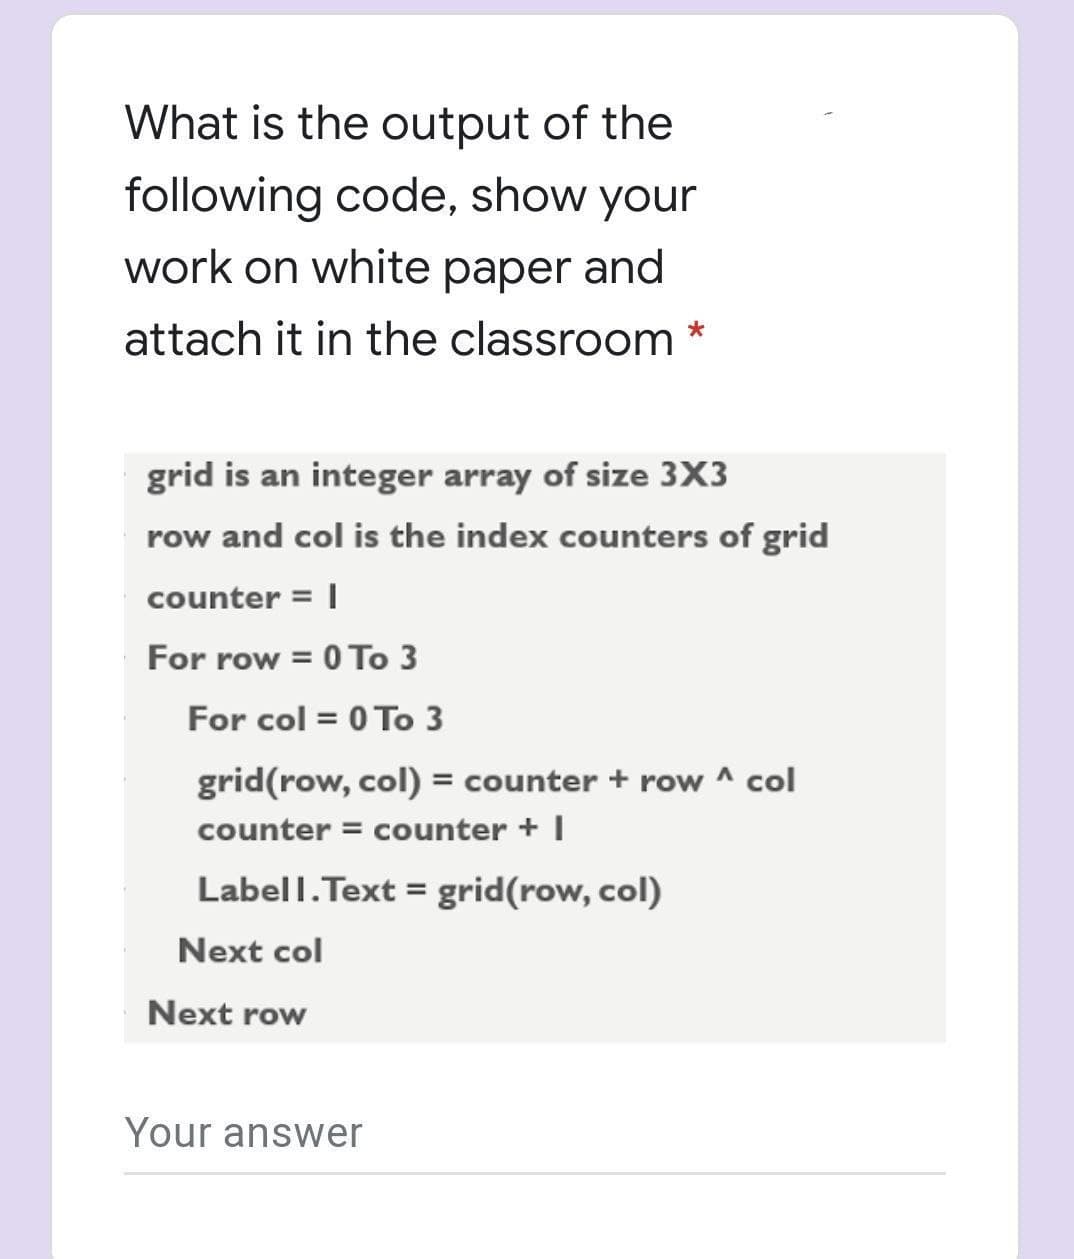 What is the output of the
following code, show your
work on white paper and
attach it in the classroom
grid is an integer array of size 3X3
row and col is the index counters of grid
counter = |
For row = 0 To 3
For col = 0 To 3
grid(row, col) = counter + row ^ col
counter = counter + I
Labell.Text = grid(row, col)
Next col
Next row
Your answer
